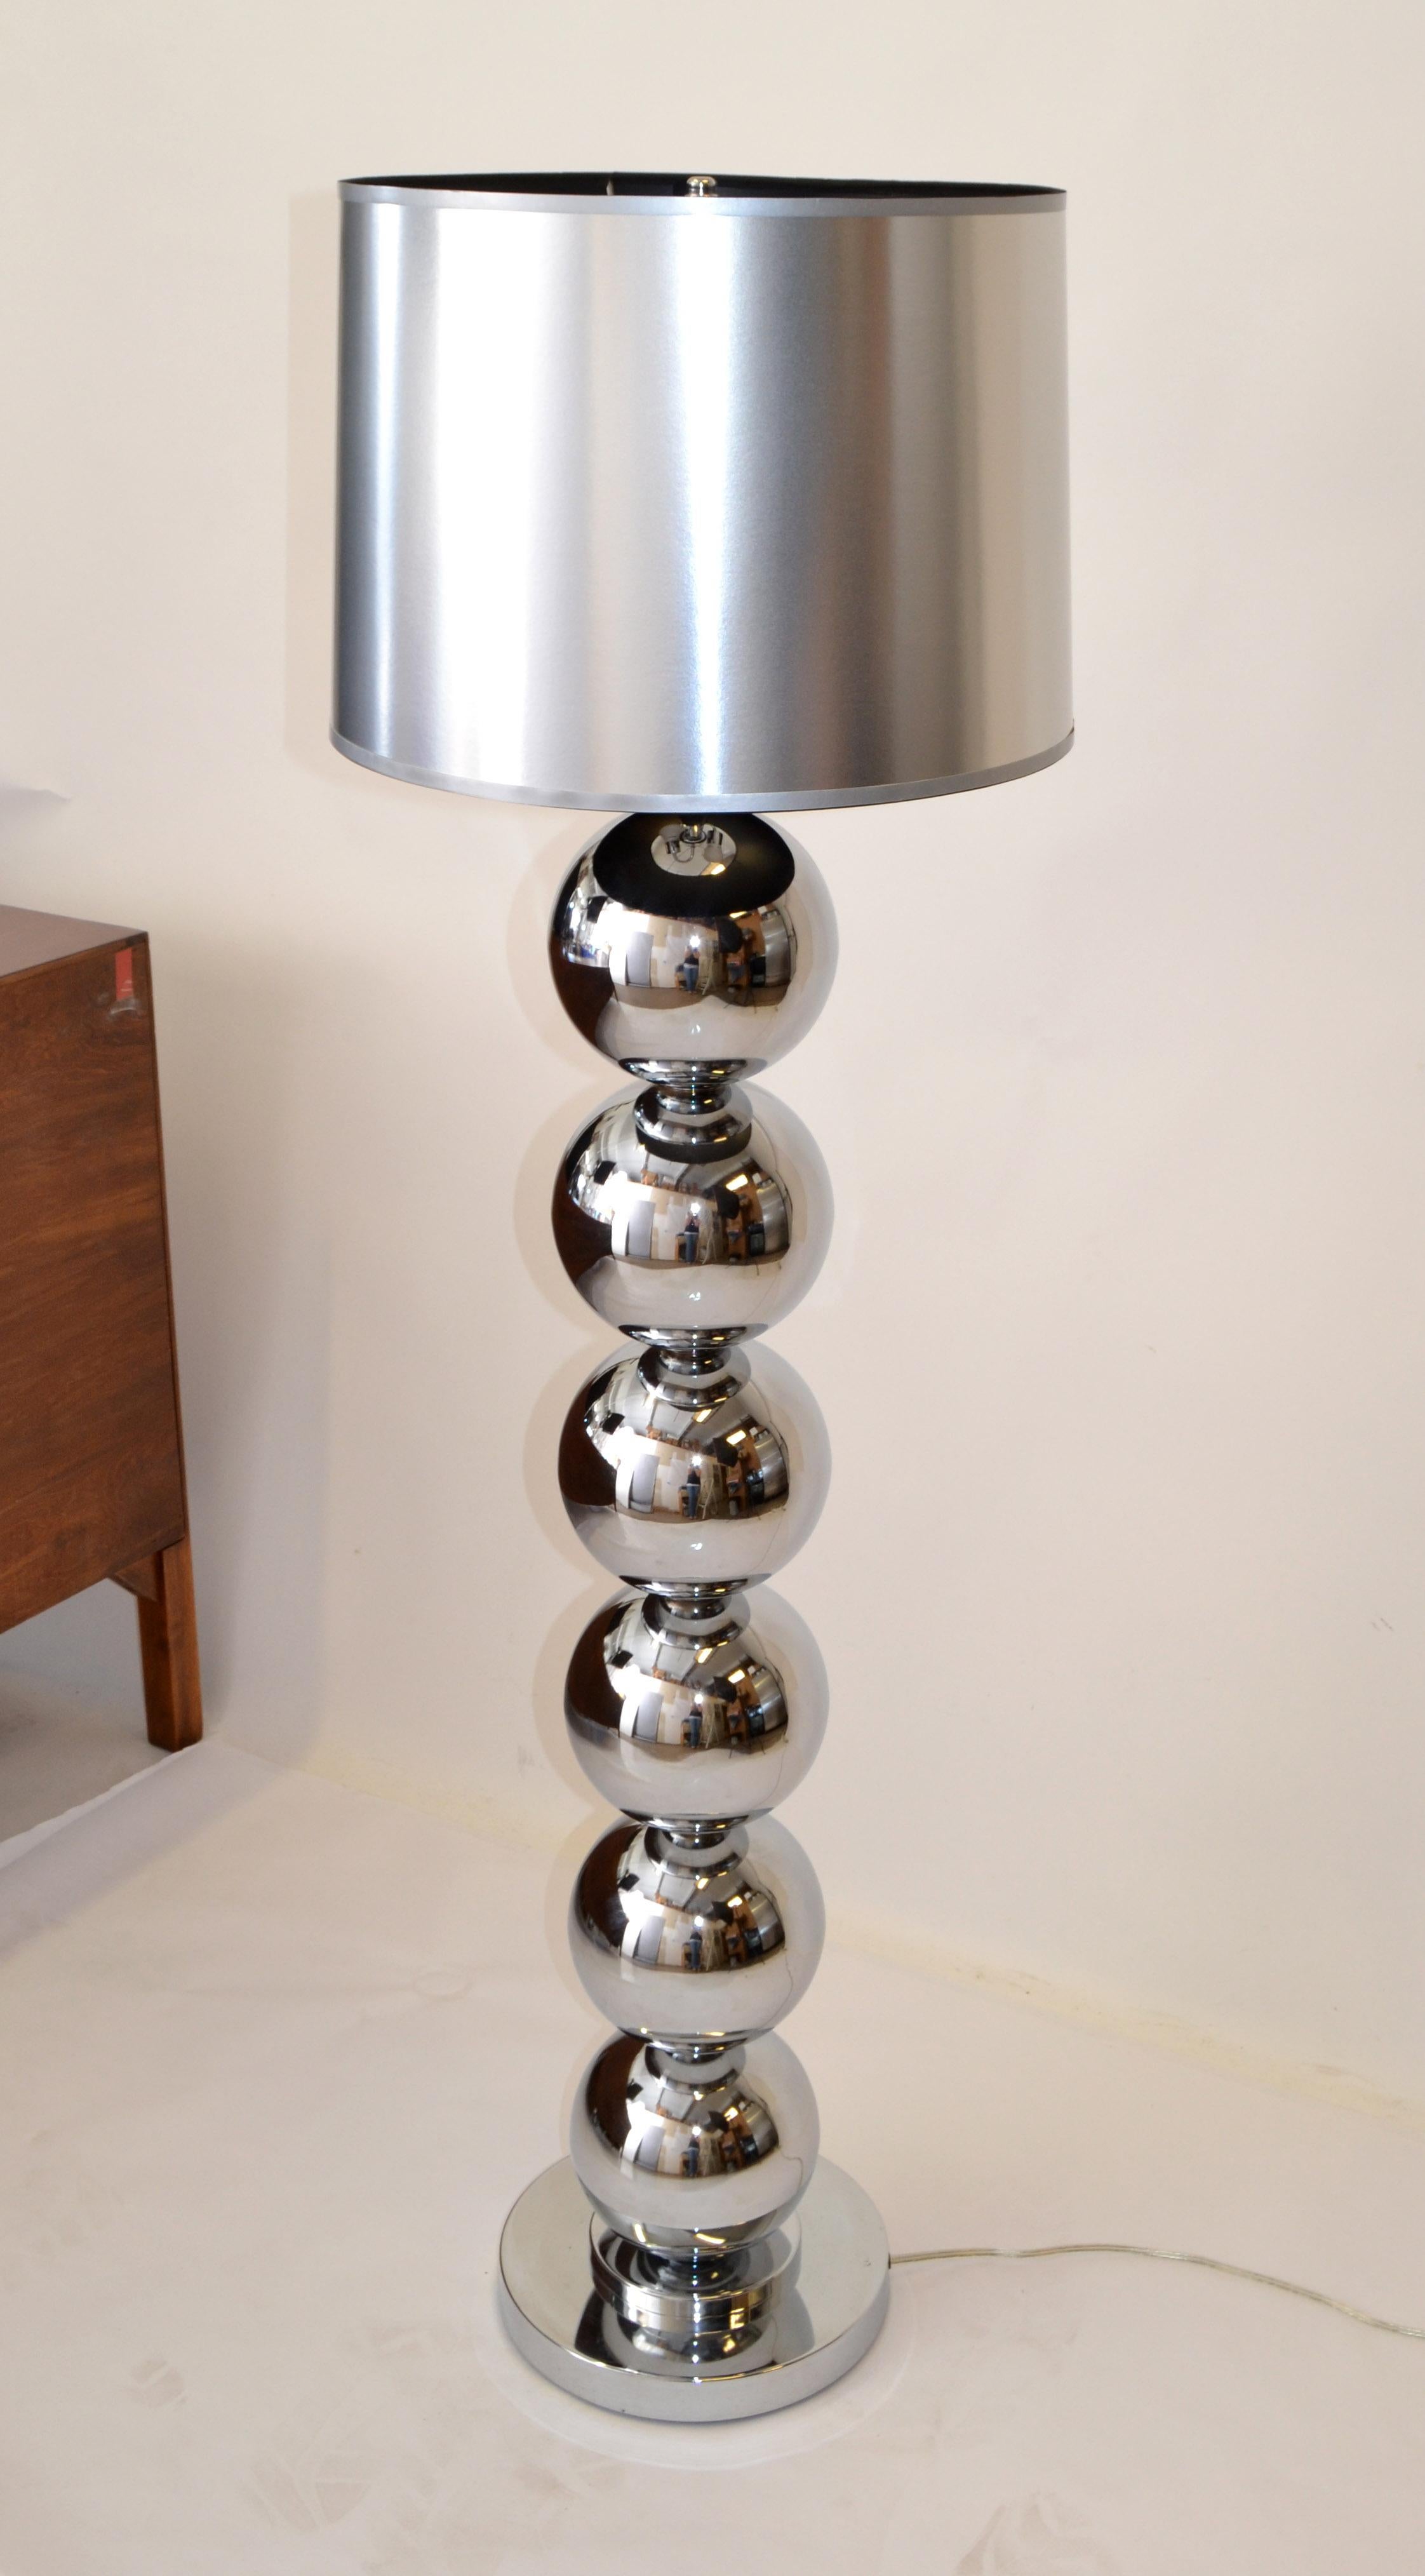 Van Teal Mid-Century Modern 2 Light Chrome Ball Floor Lamp Silver Black Shade 80 In Good Condition For Sale In Miami, FL